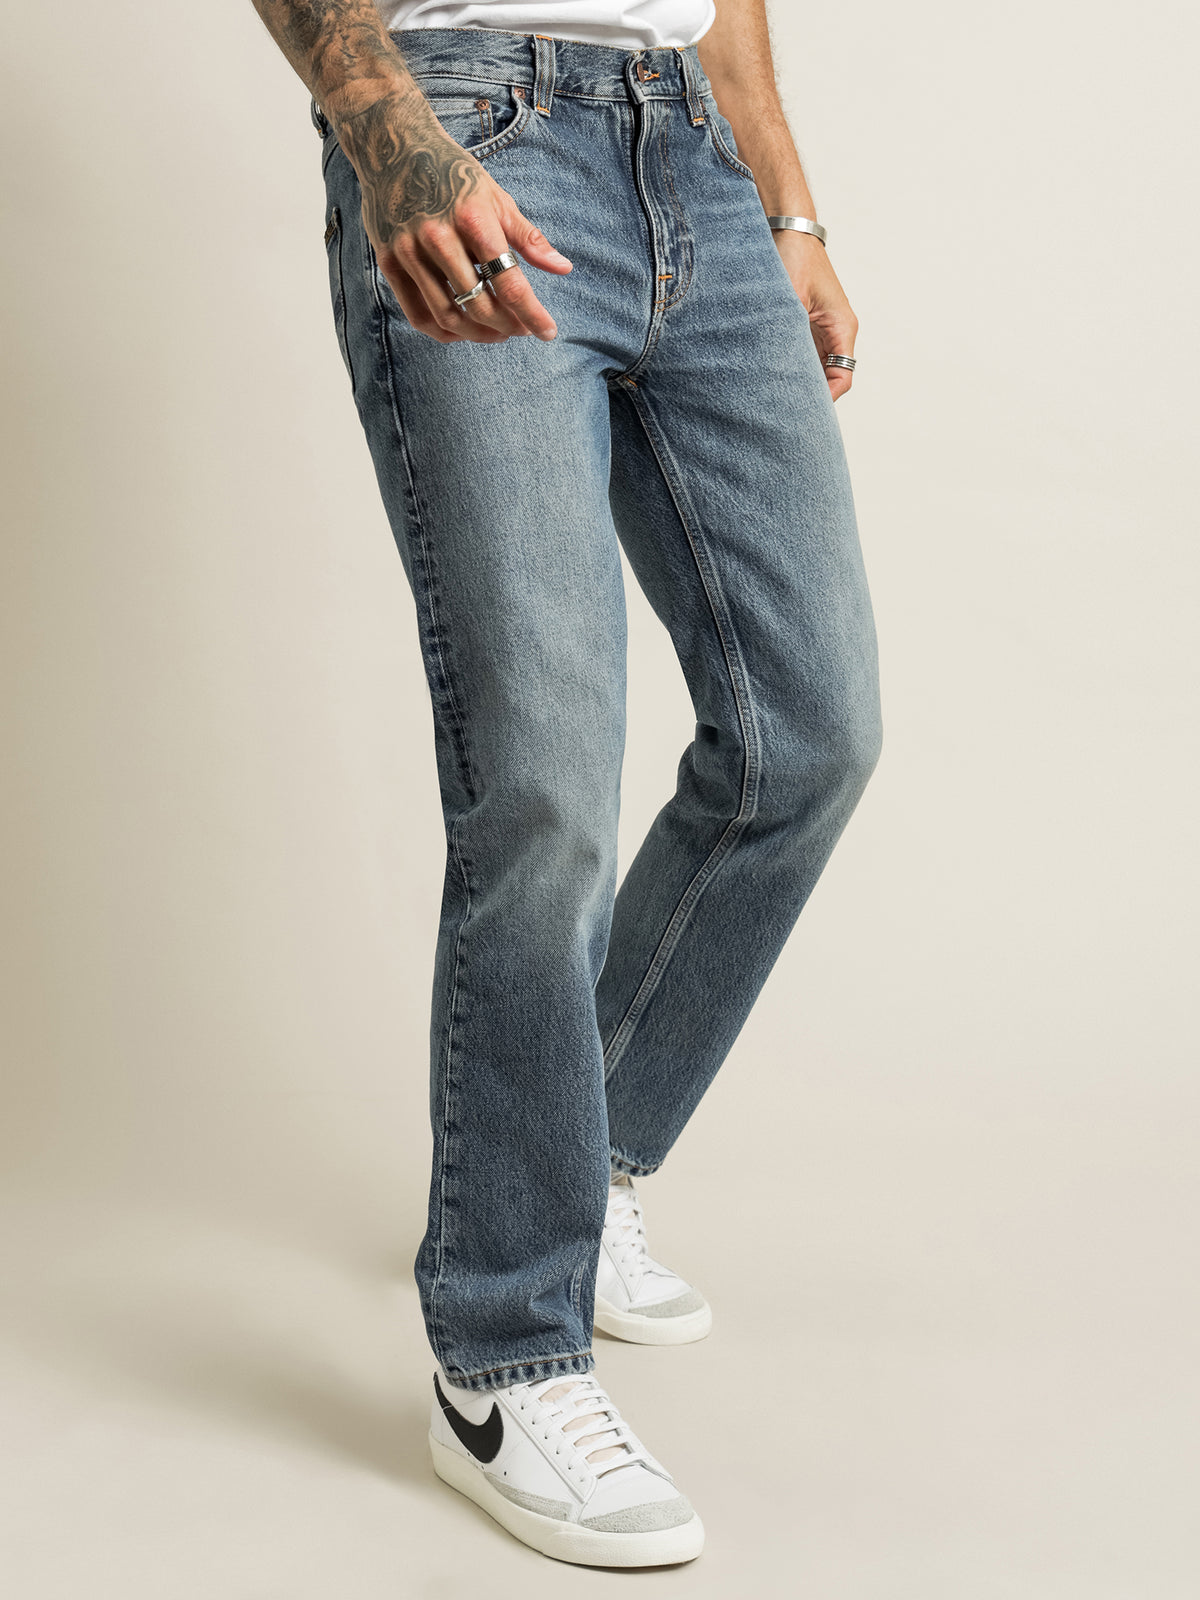 Gritty Jackson Jeans in Old Gold